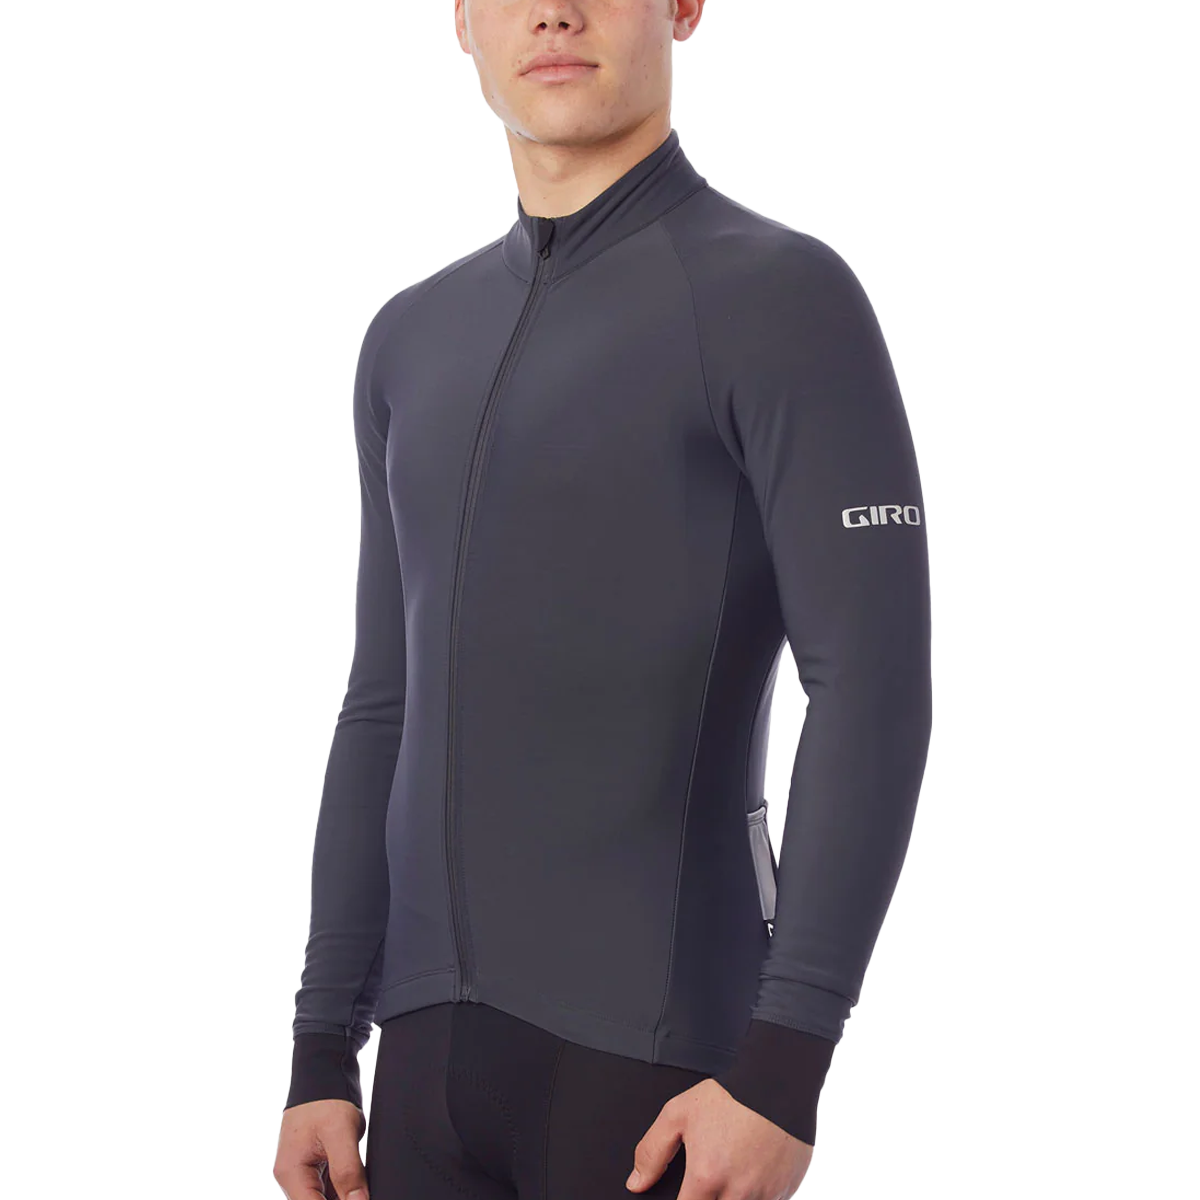 Chrono Thermal Long Sleeve Jersey alternate view